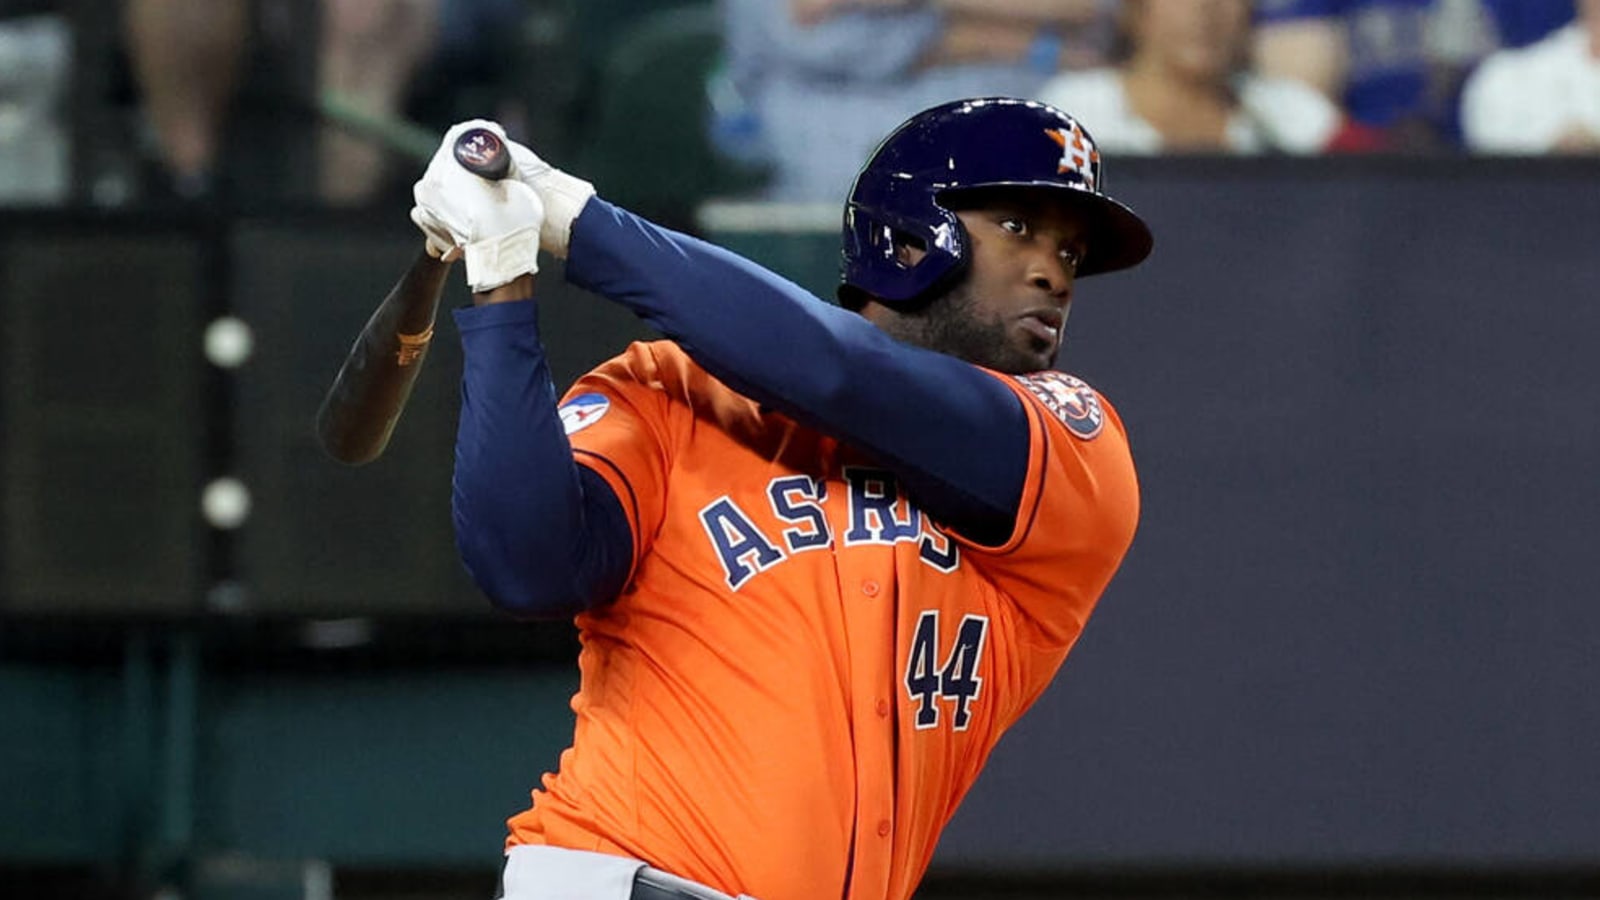 Astros take ALCS Game 3 over Rangers